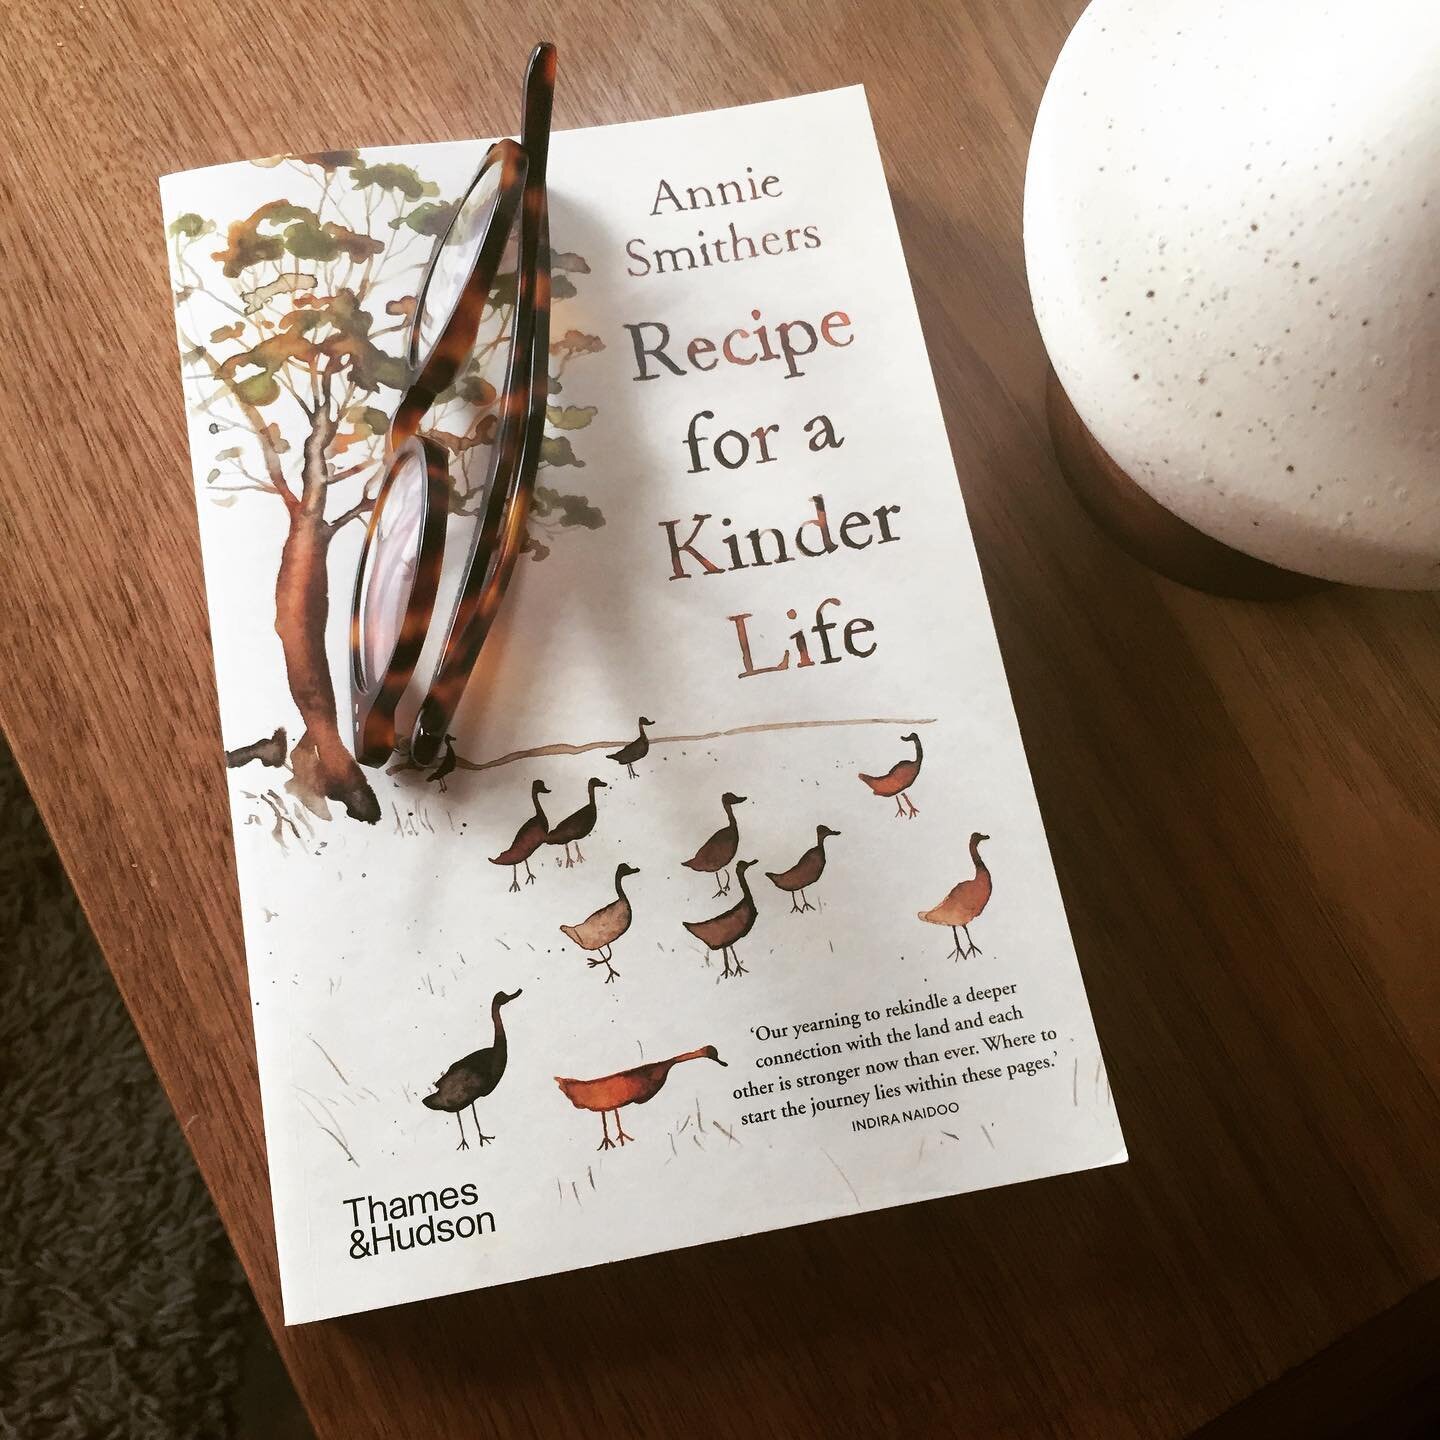 January reading - Recipe for a Kinder Life by Annie Smithers. A gorgeous gift from a friend who knows me well 🧡